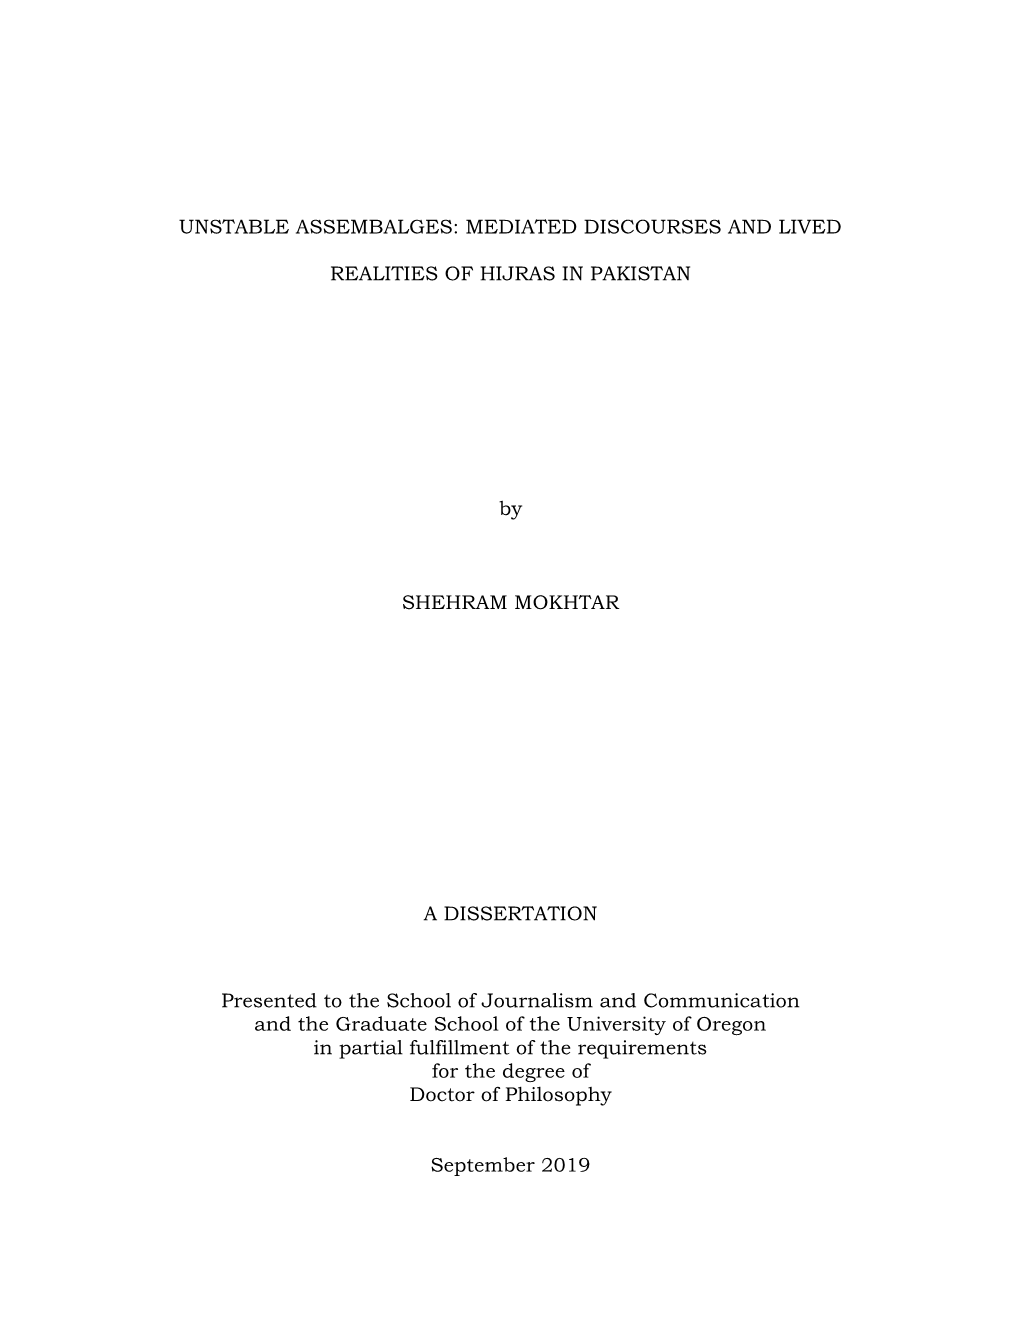 UNSTABLE ASSEMBALGES: MEDIATED DISCOURSES and LIVED REALITIES of HIJRAS in PAKISTAN by SHEHRAM MOKHTAR a DISSERTATION Presented